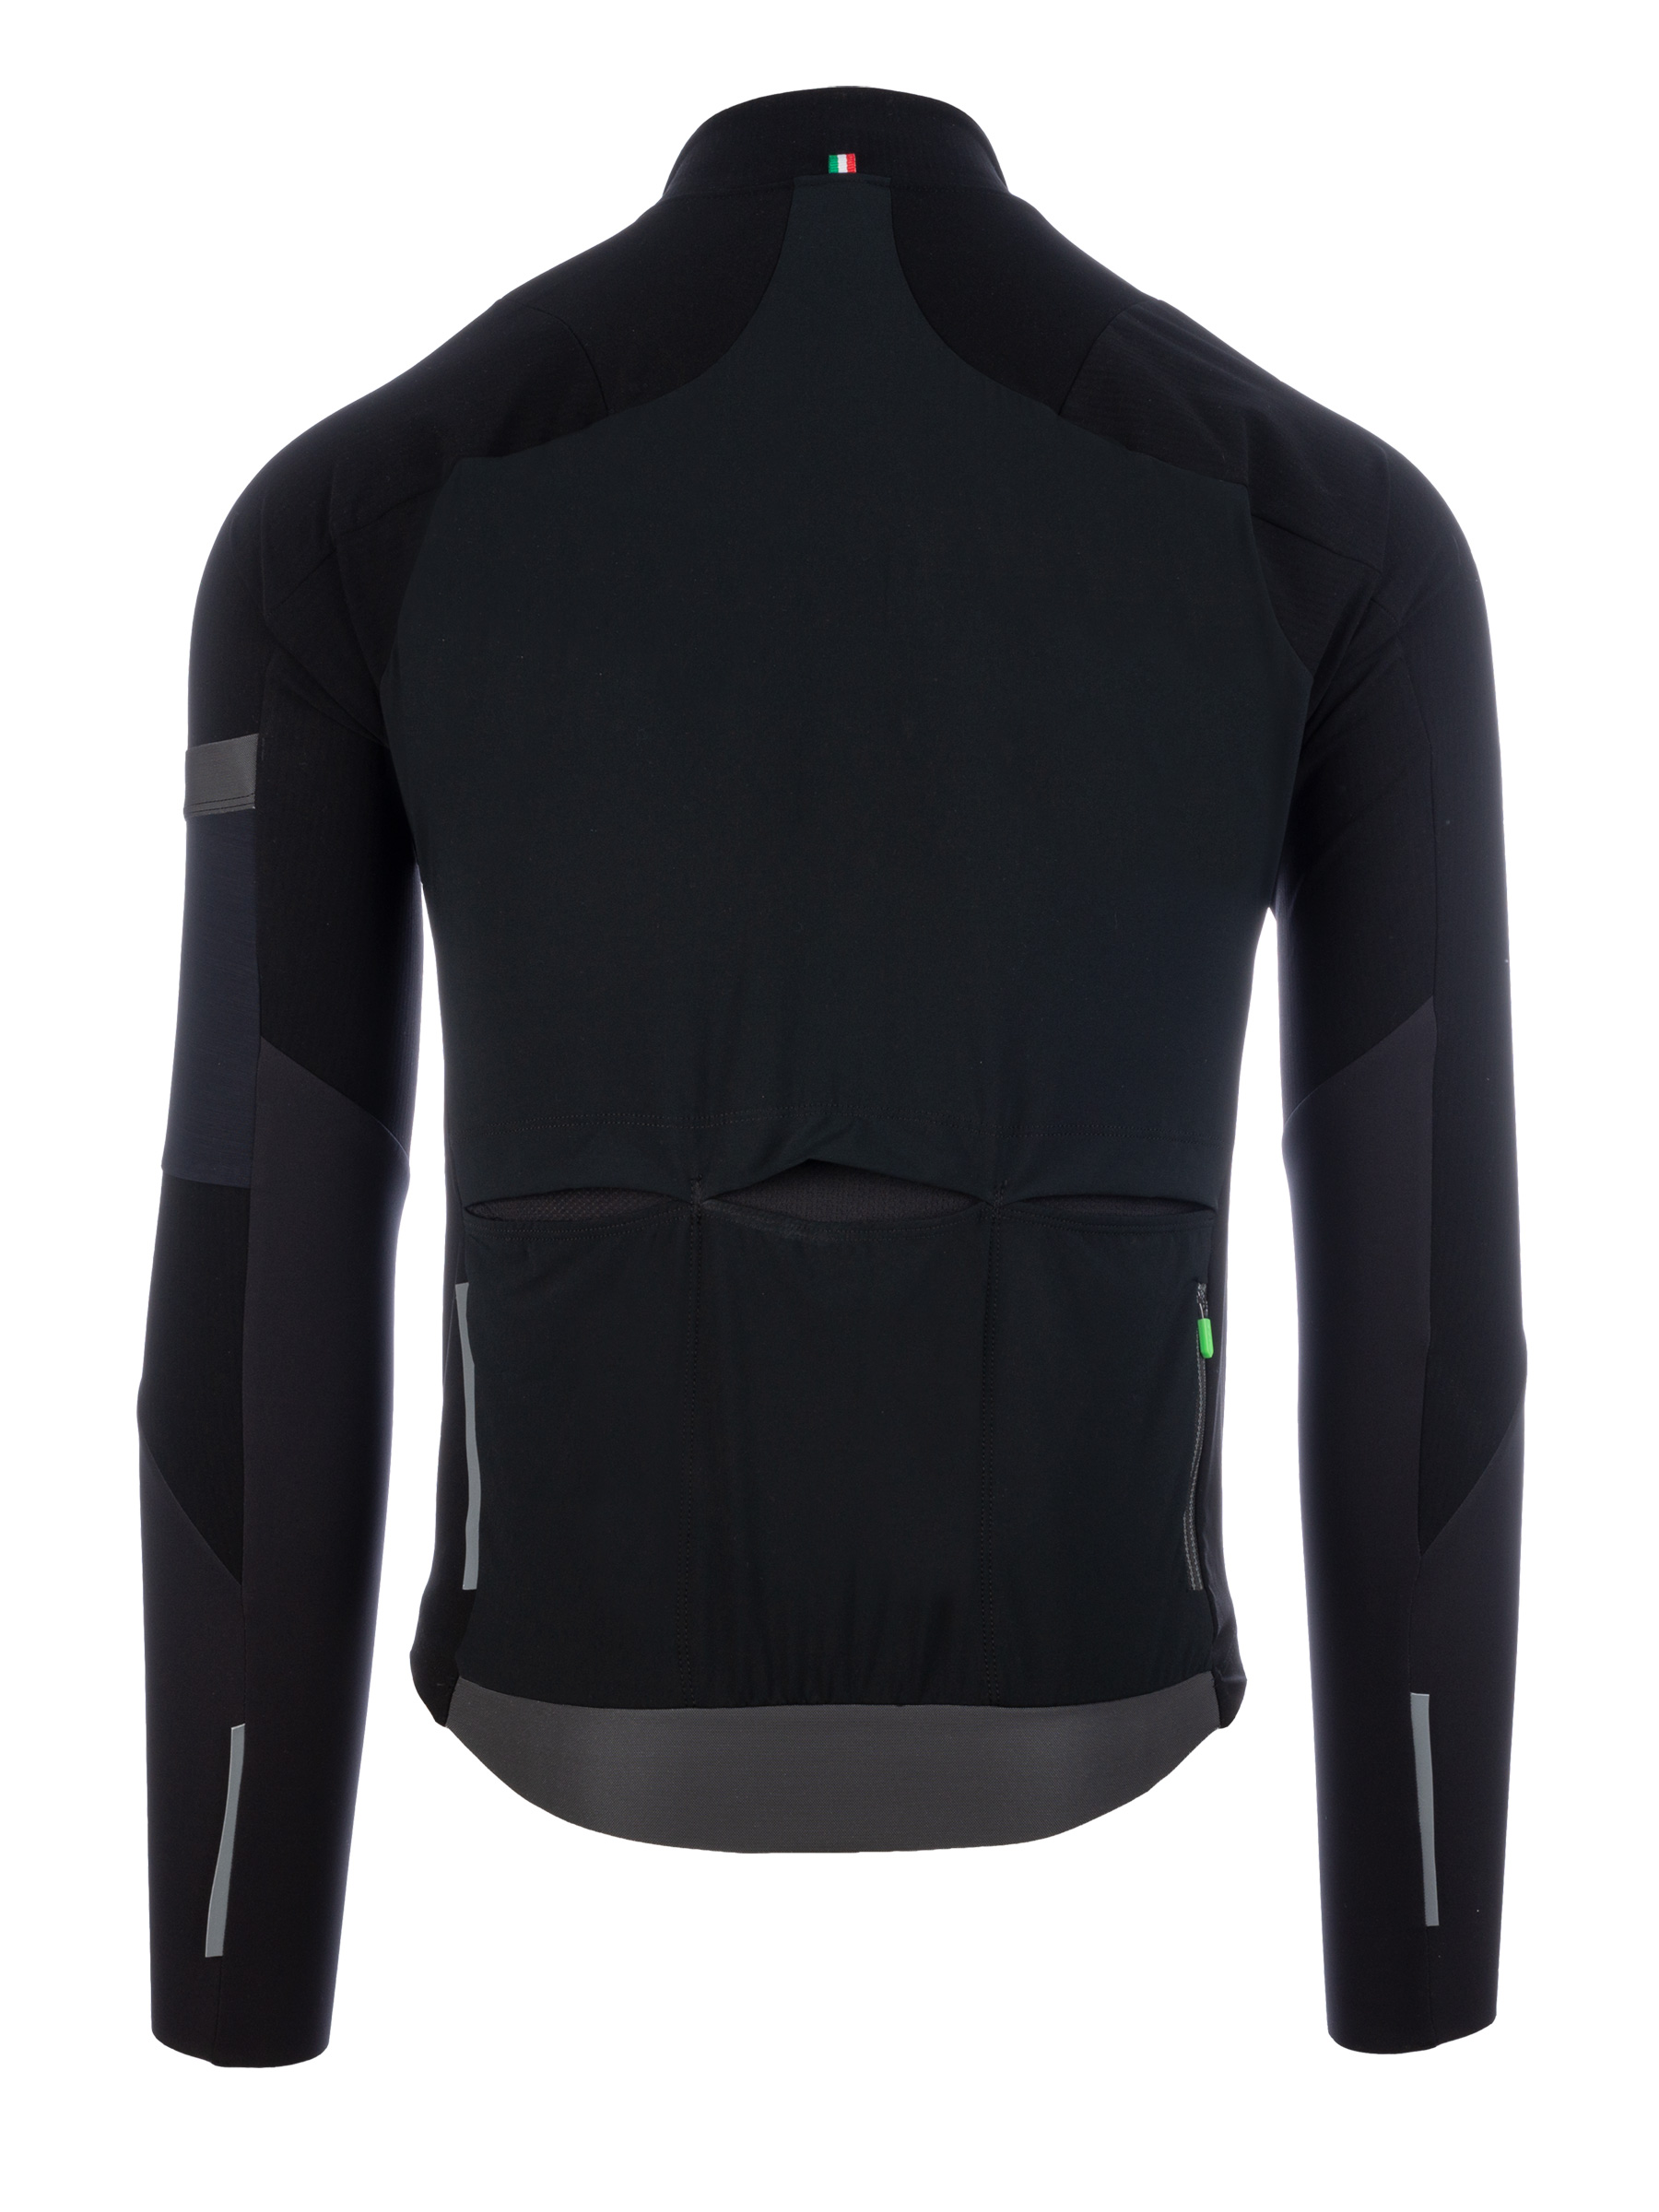 Q36.5 Woolf Long Sleeve Jersey - Unisex – Above Category